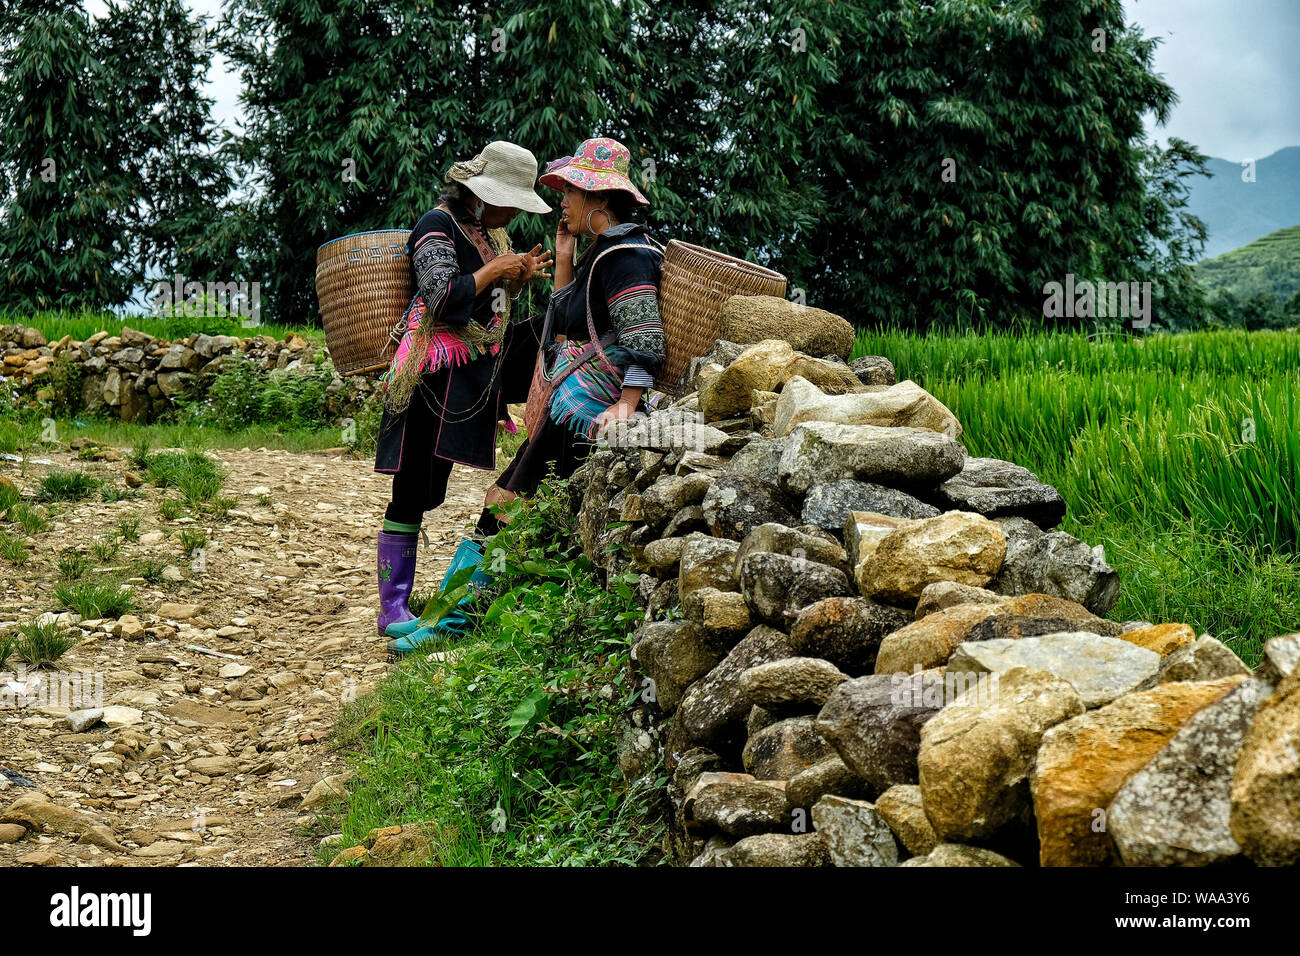 Sa Pa, Vietnam - August 23: Unidentified women from the Black Hmong Ethnic Minority  on August 23, 2018 in Sa Pa, Vietnam. Stock Photo